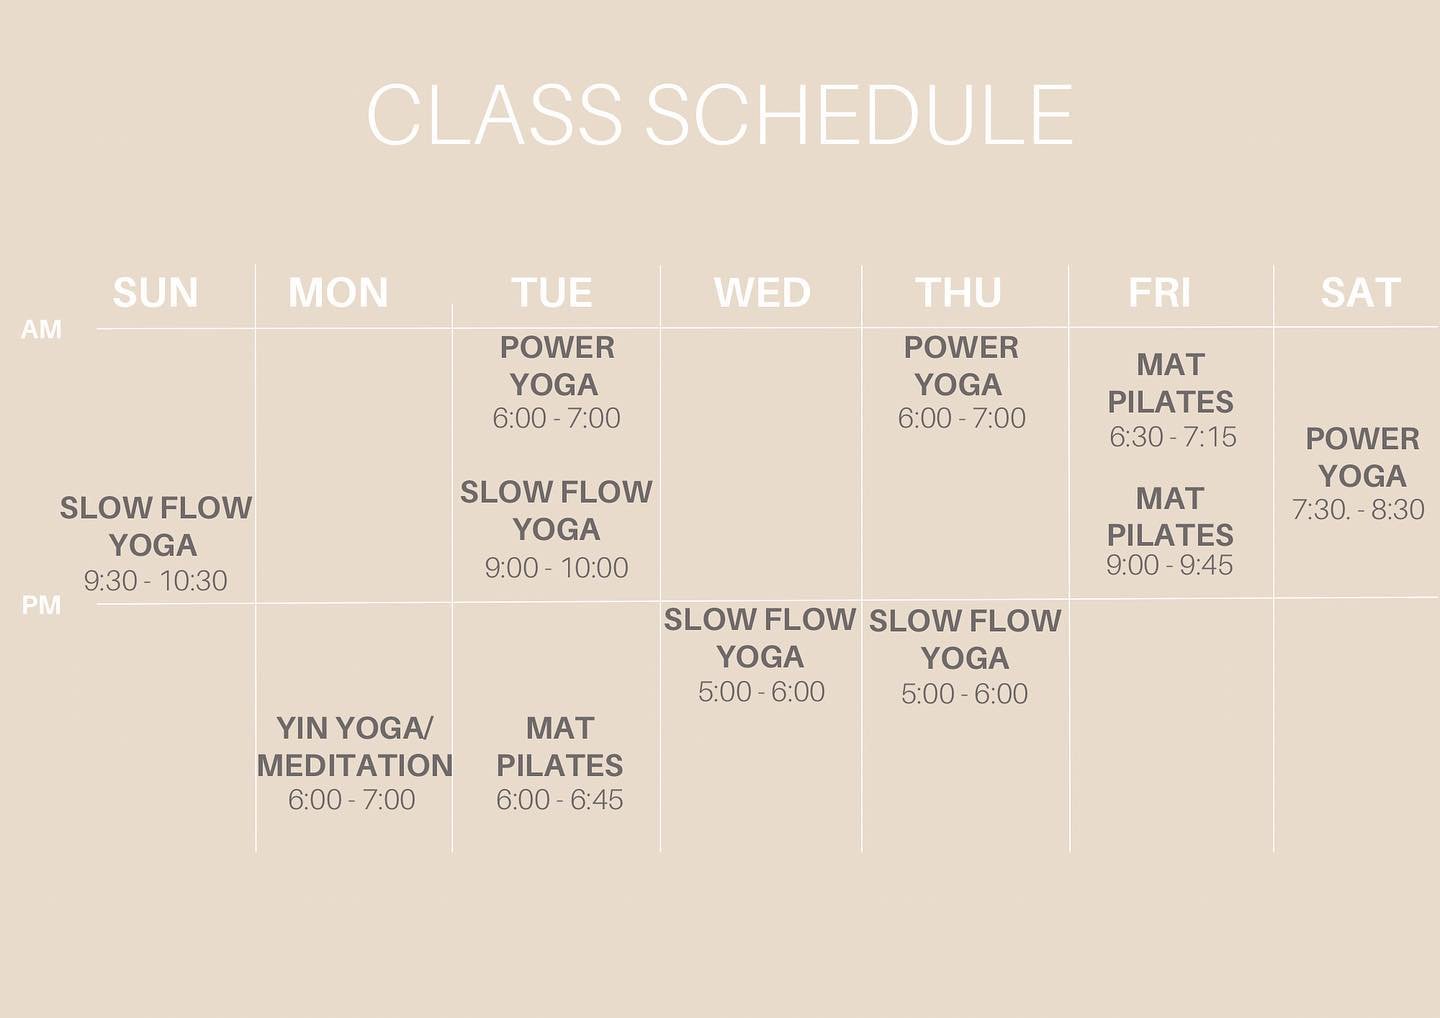 SCHEDULE UPDATE 🙏

You may have noticed we&rsquo;ve added in Saturday Power Yoga at 7:30am - if you&rsquo;re new to Power Yoga expect a journey of mindfulness, planks, and strong body holds - see you on the mat!